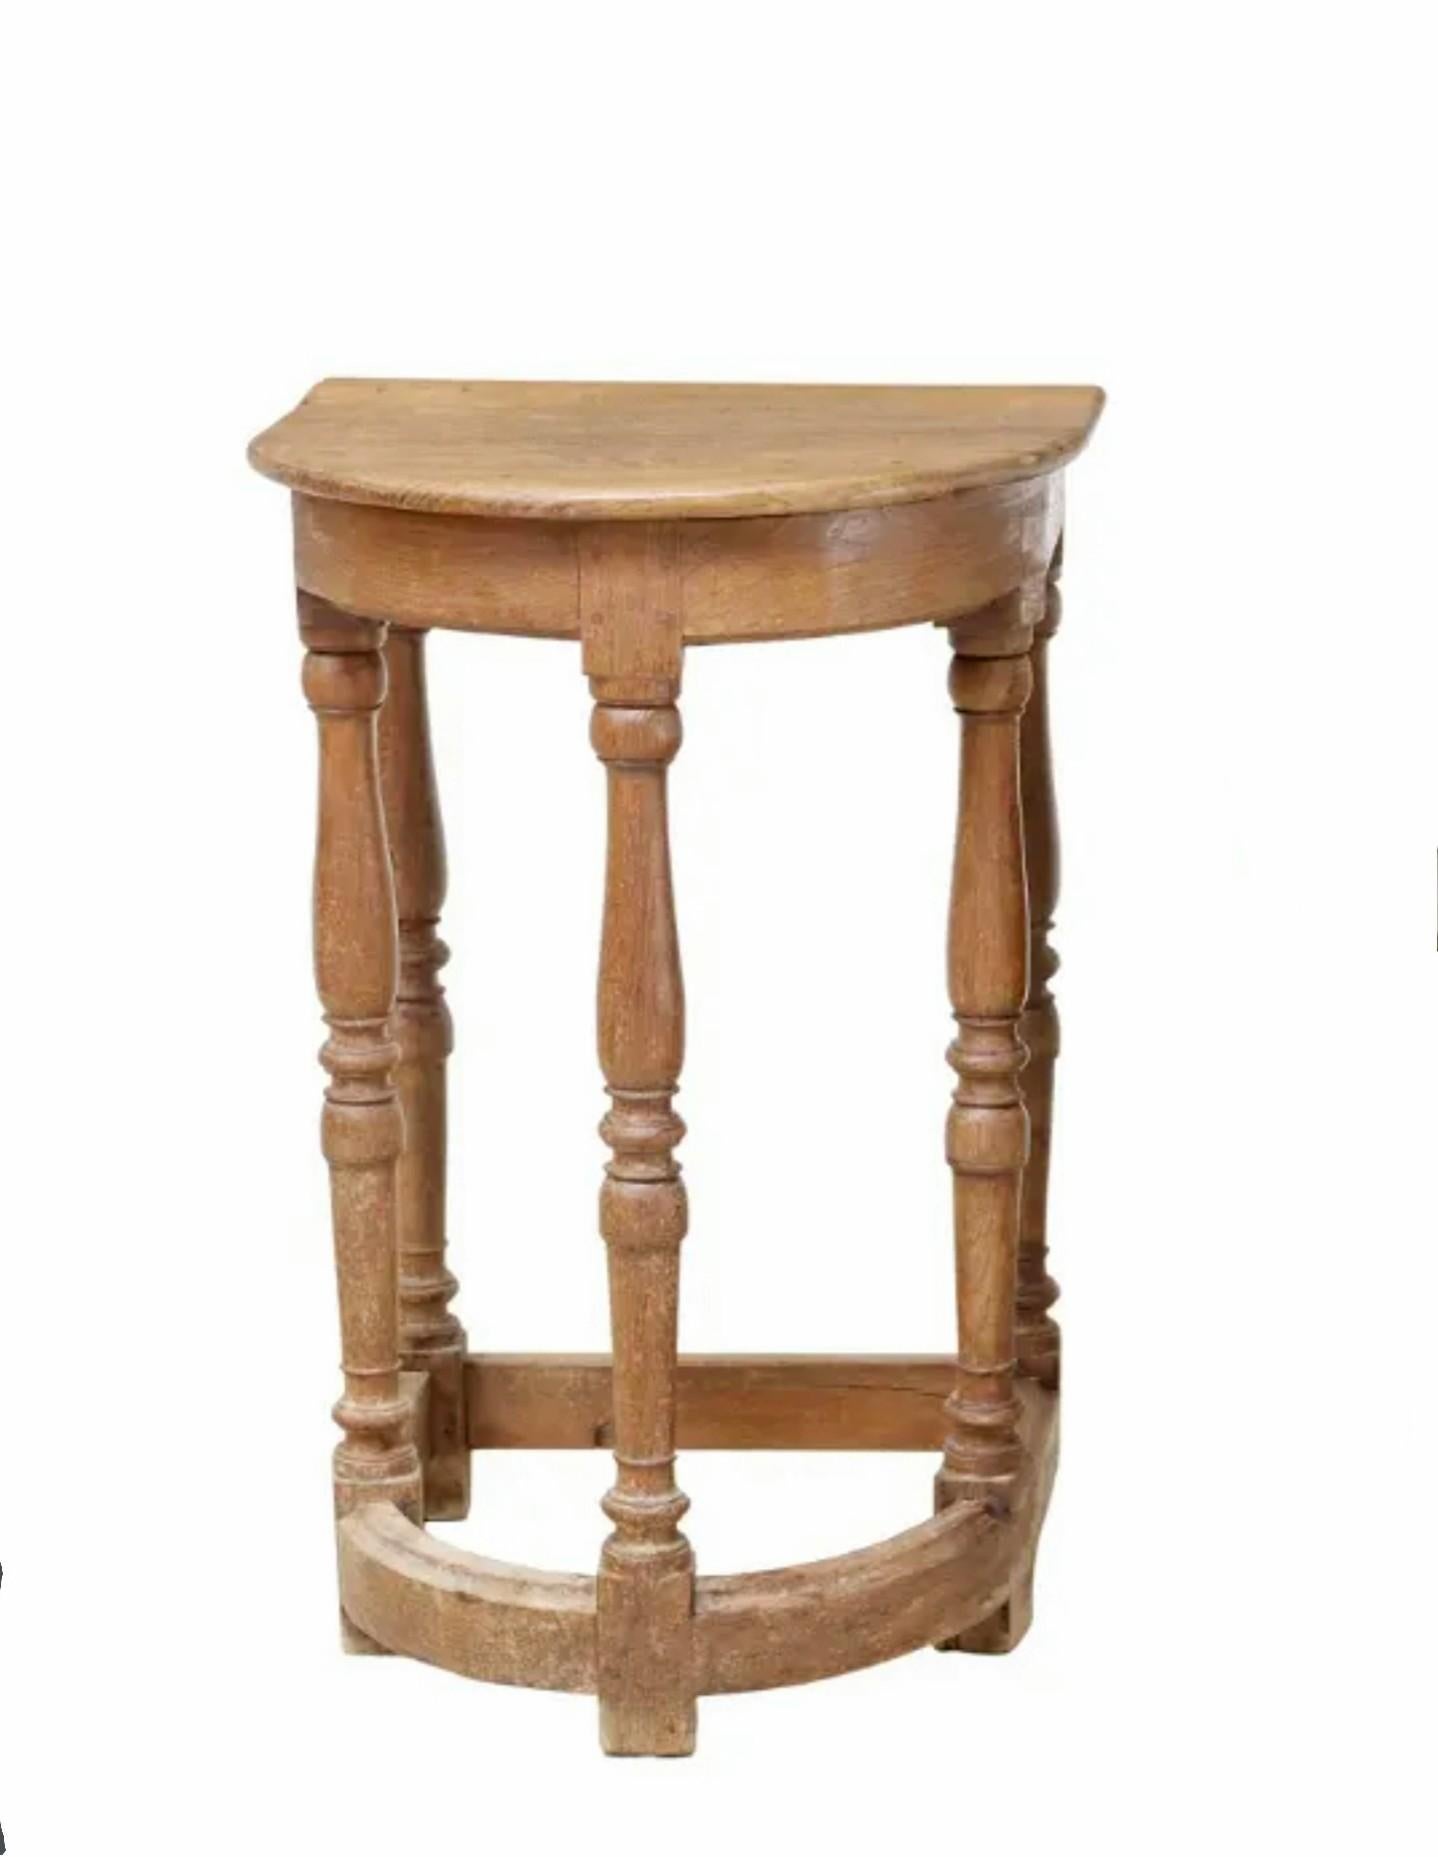 A charming rustic antique country European side table with beautifully aged warm patina. 

Hand-crafted of solid oak in Continental Europe in the late 18th / early 19th century, French Louis XIII style, joint stool taste, featuring high-quality